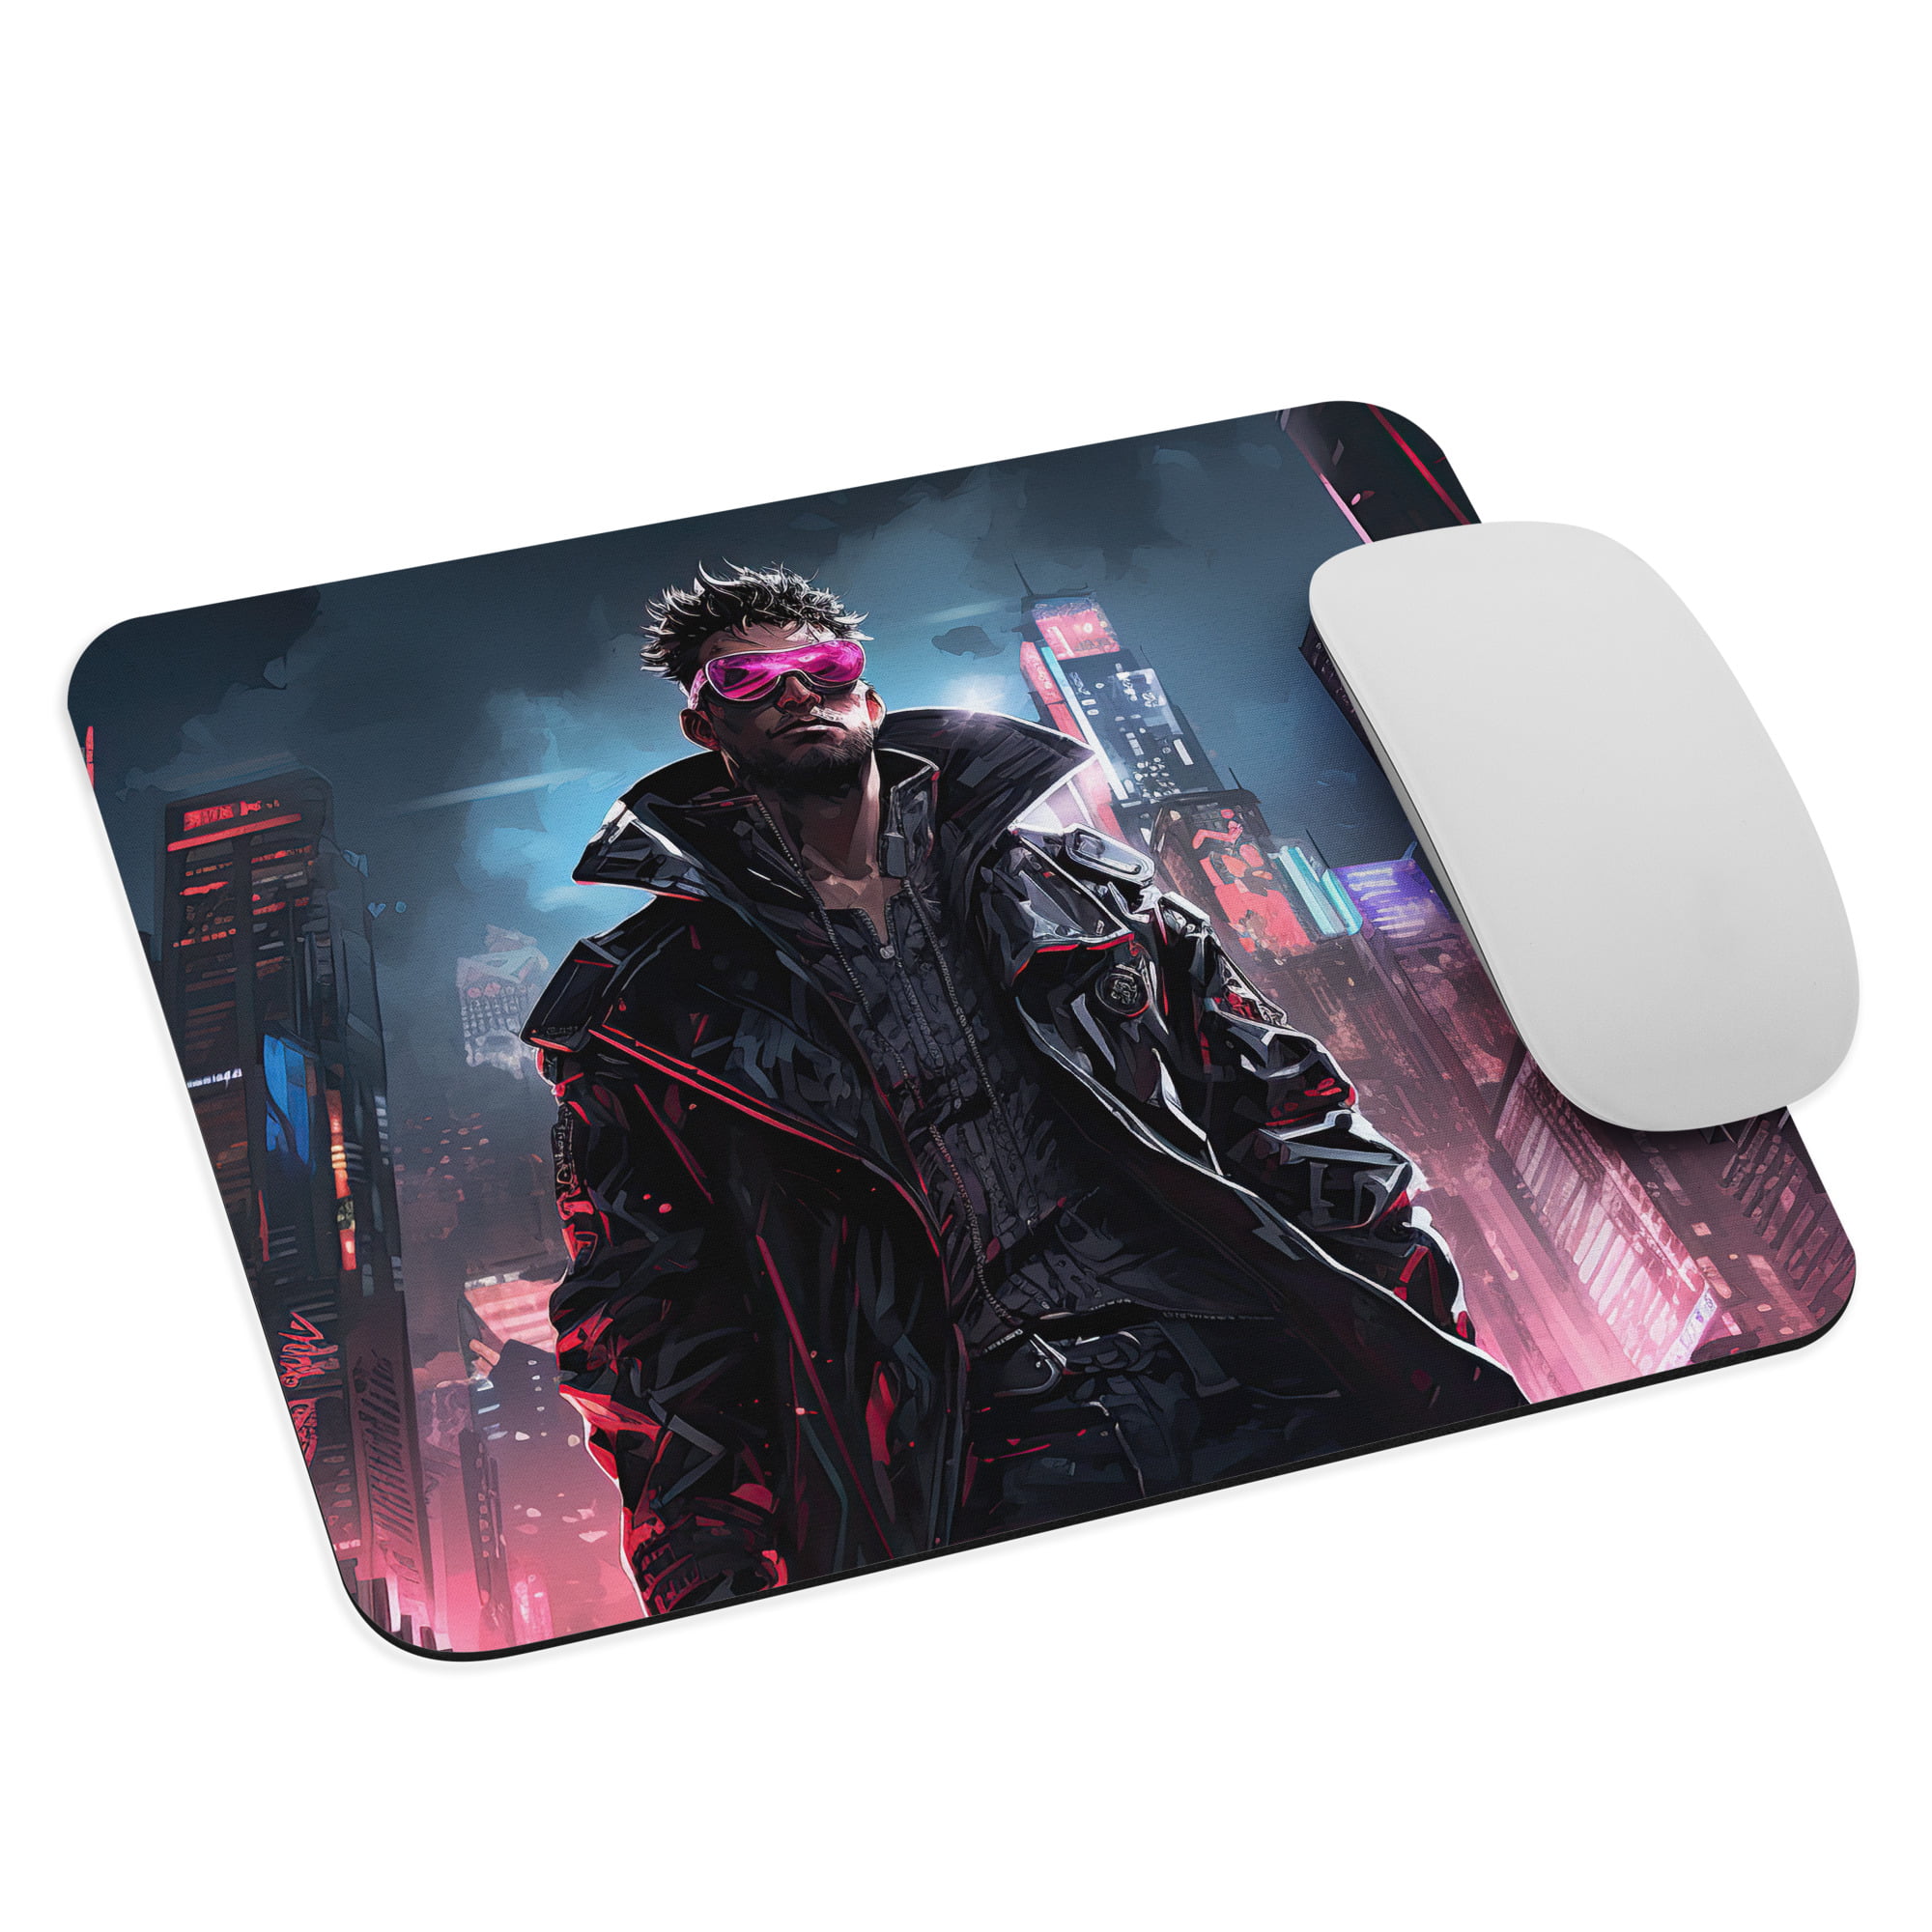 Cool Cyberpunk Dude Mouse pad